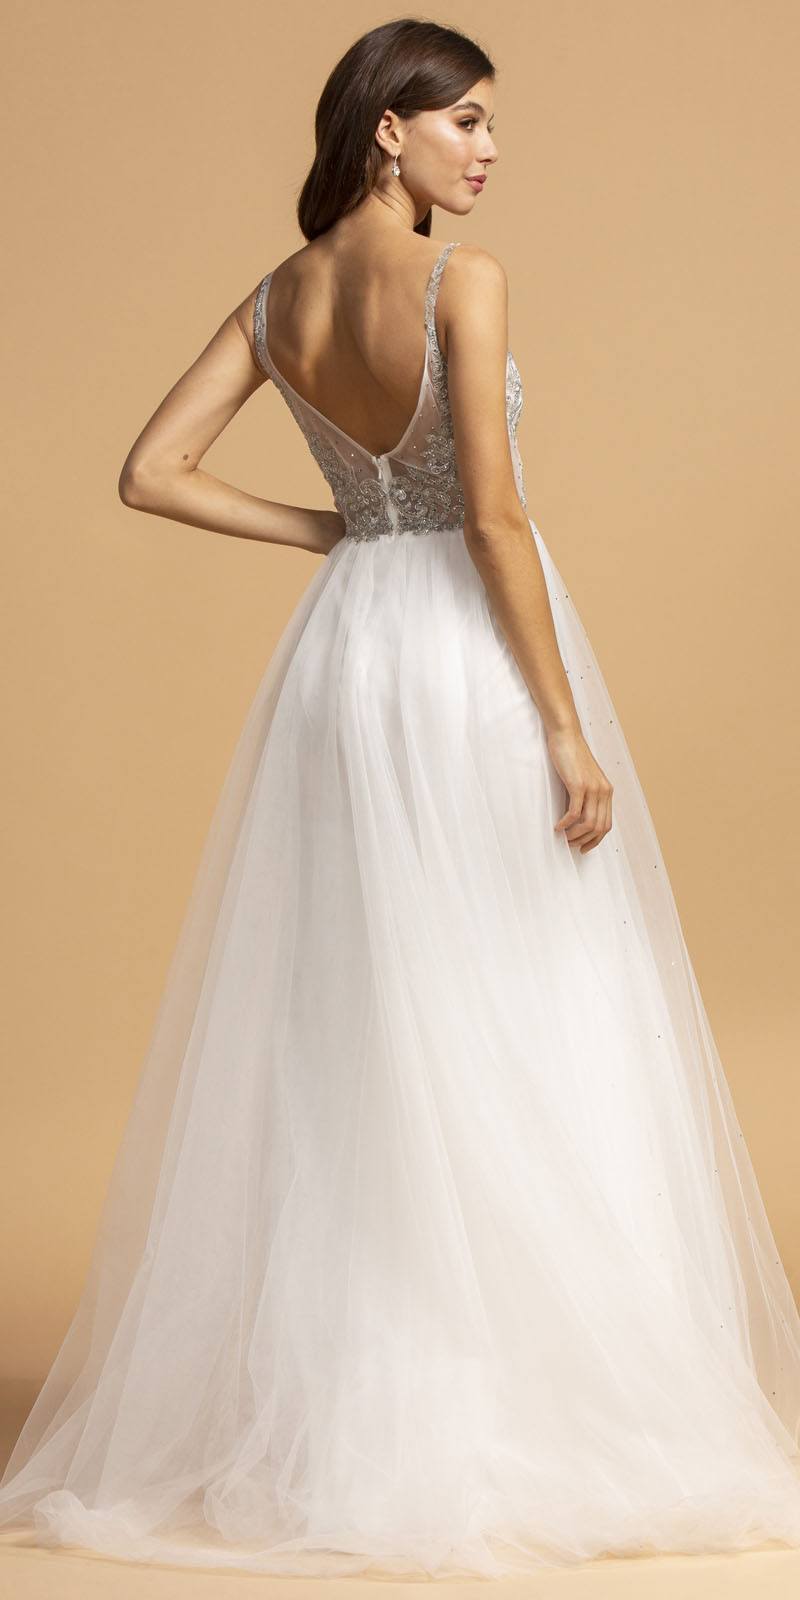 Aspeed Design L2180 Appliqued Long Prom Dress with Cape Skirt Off White/Silver